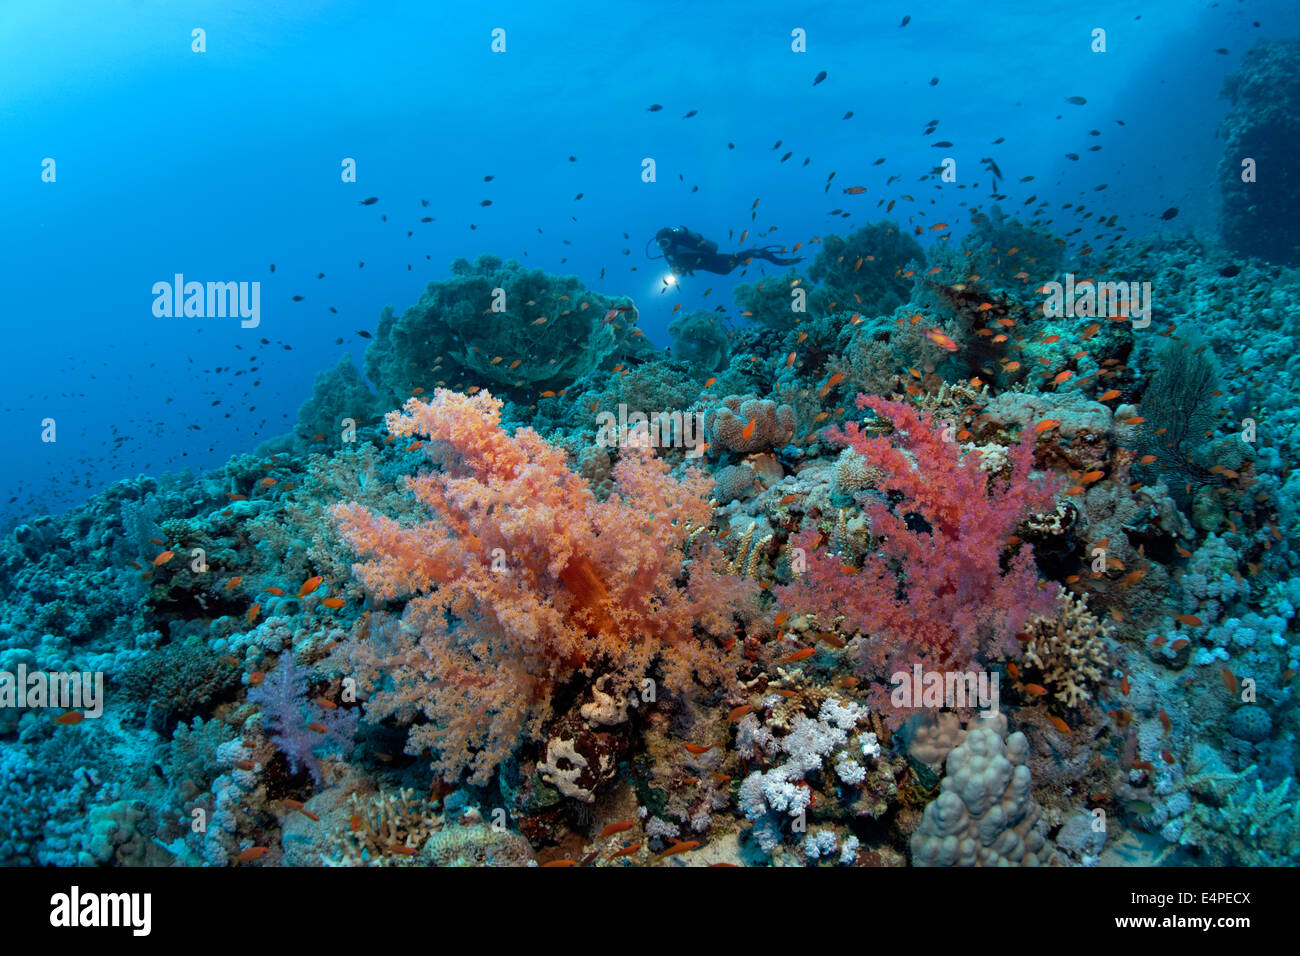 Scuba diver swimming above the corals of the densely overgrown eastern plateau of dive site Shaab Sharm, Klunzinger's Soft Stock Photo